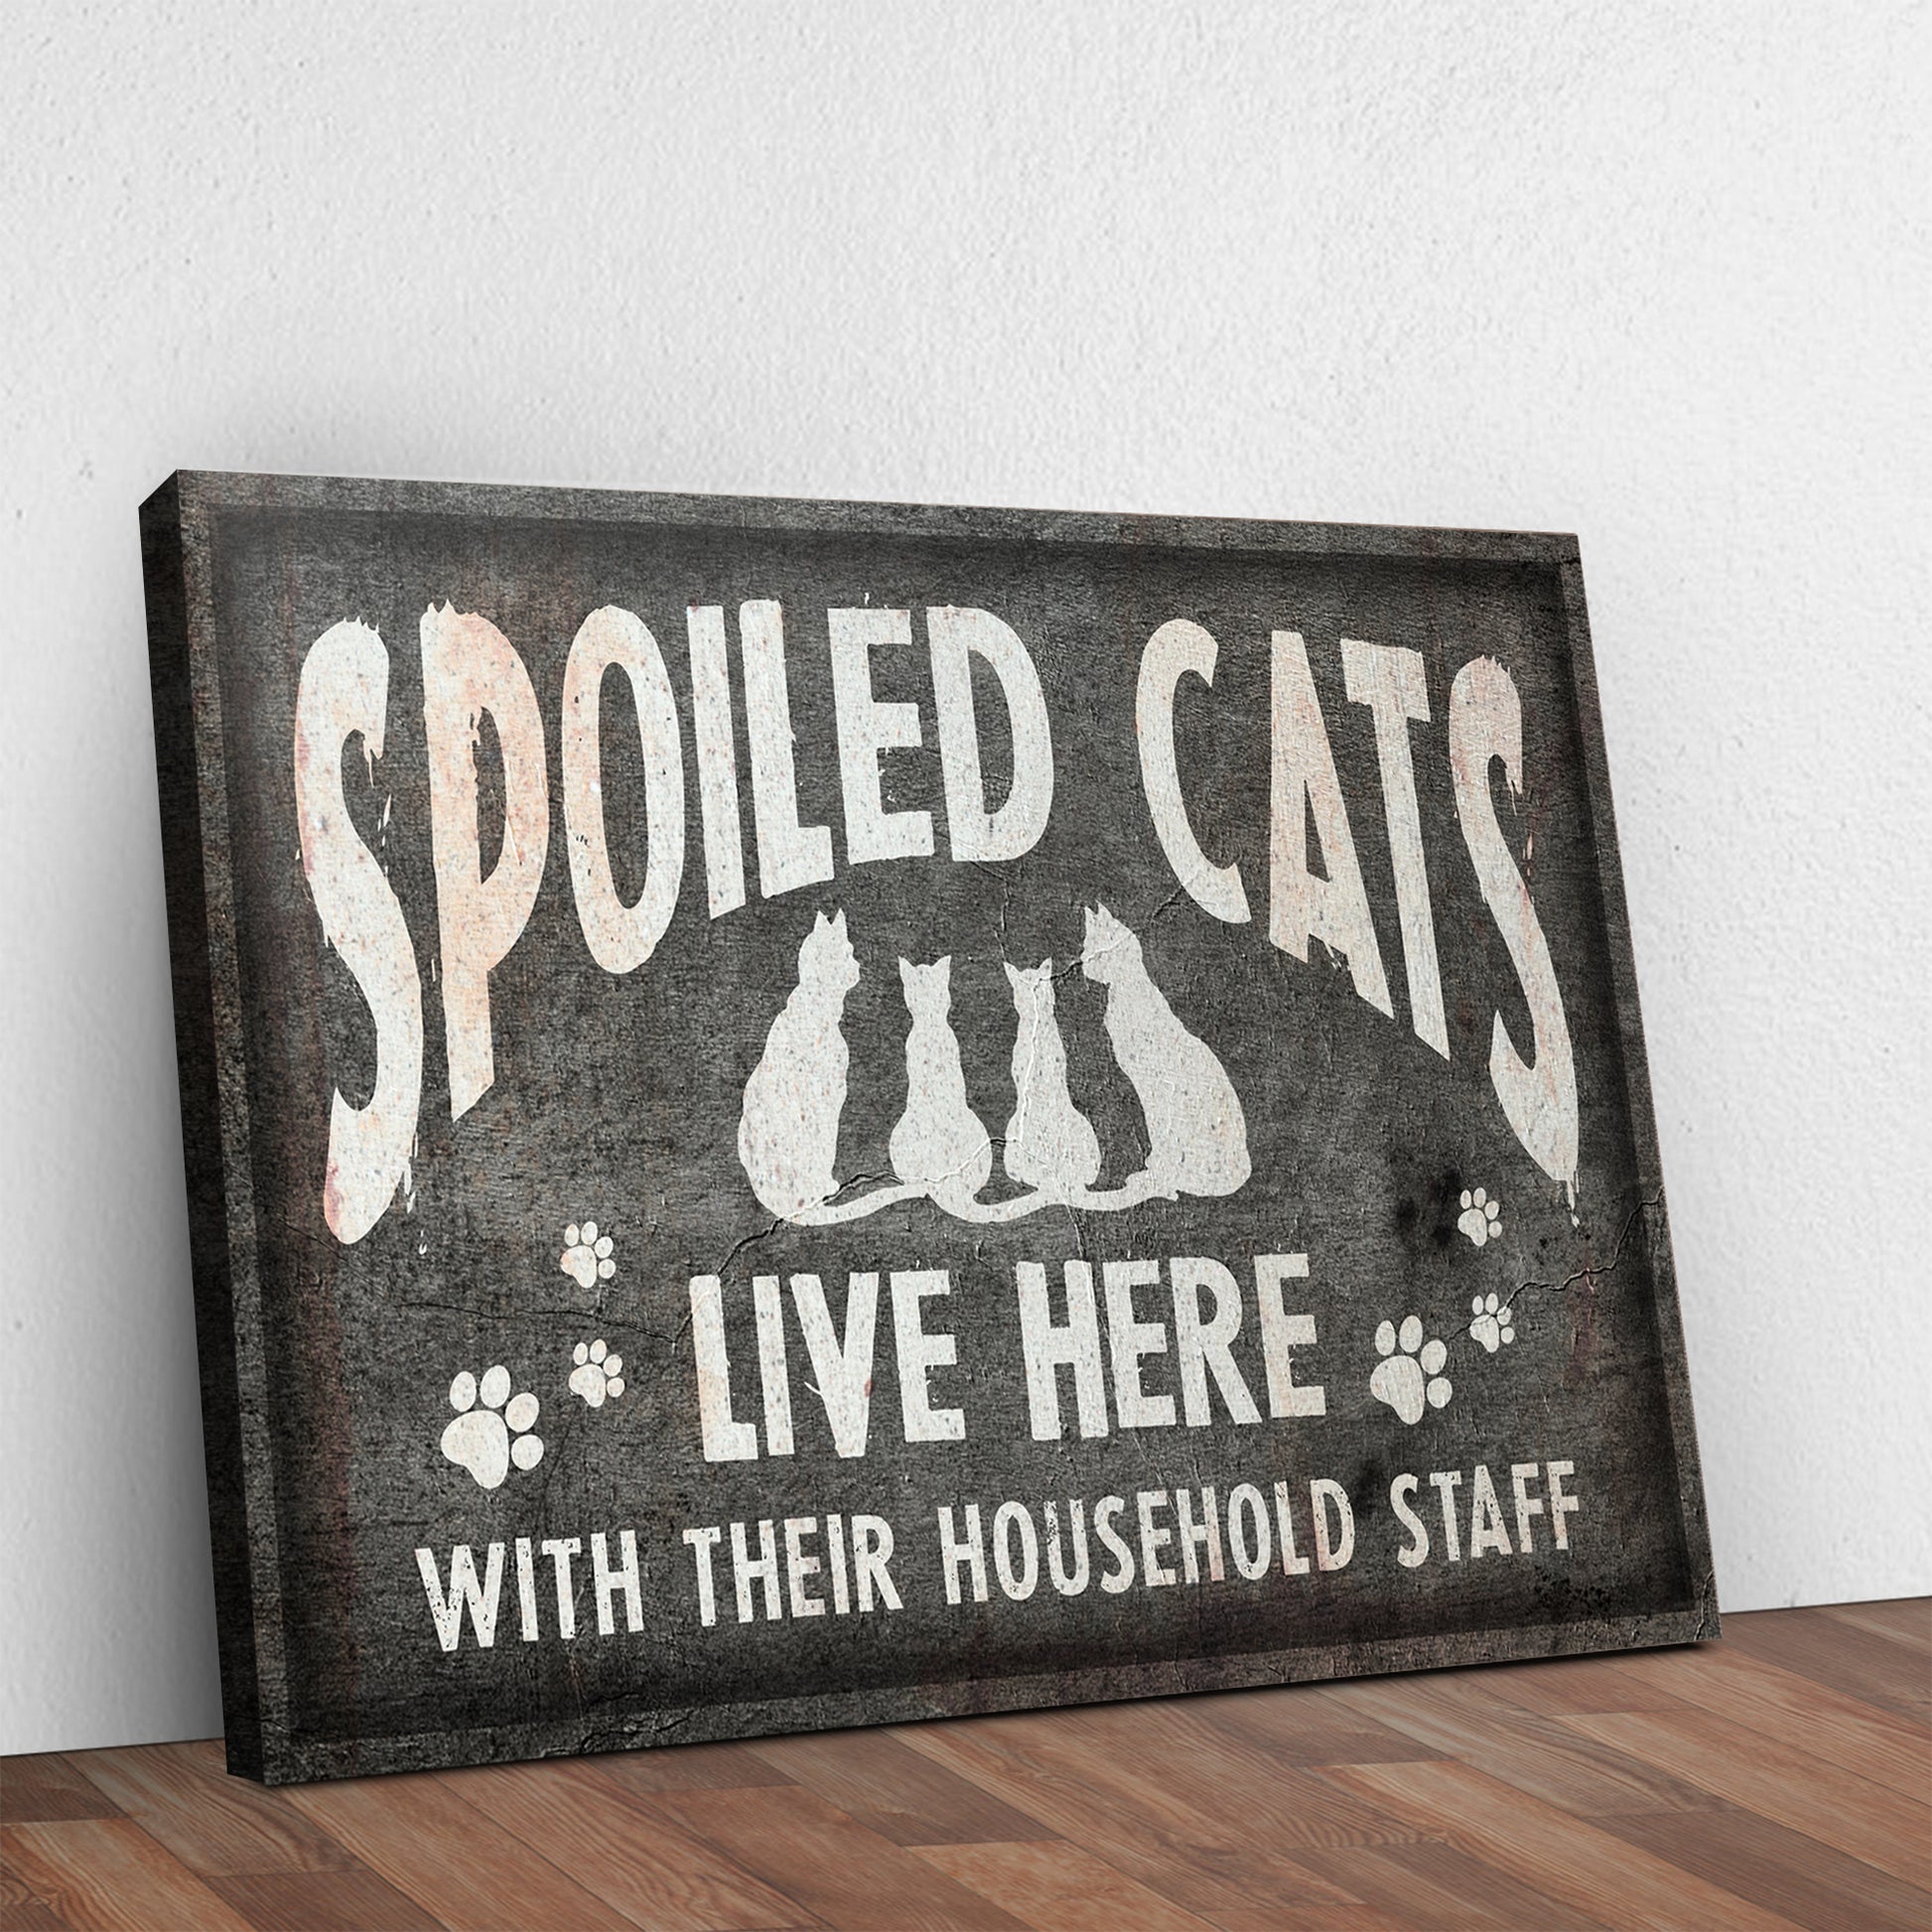 Spoiled Cats Live Here - Image by Tailored Canvases